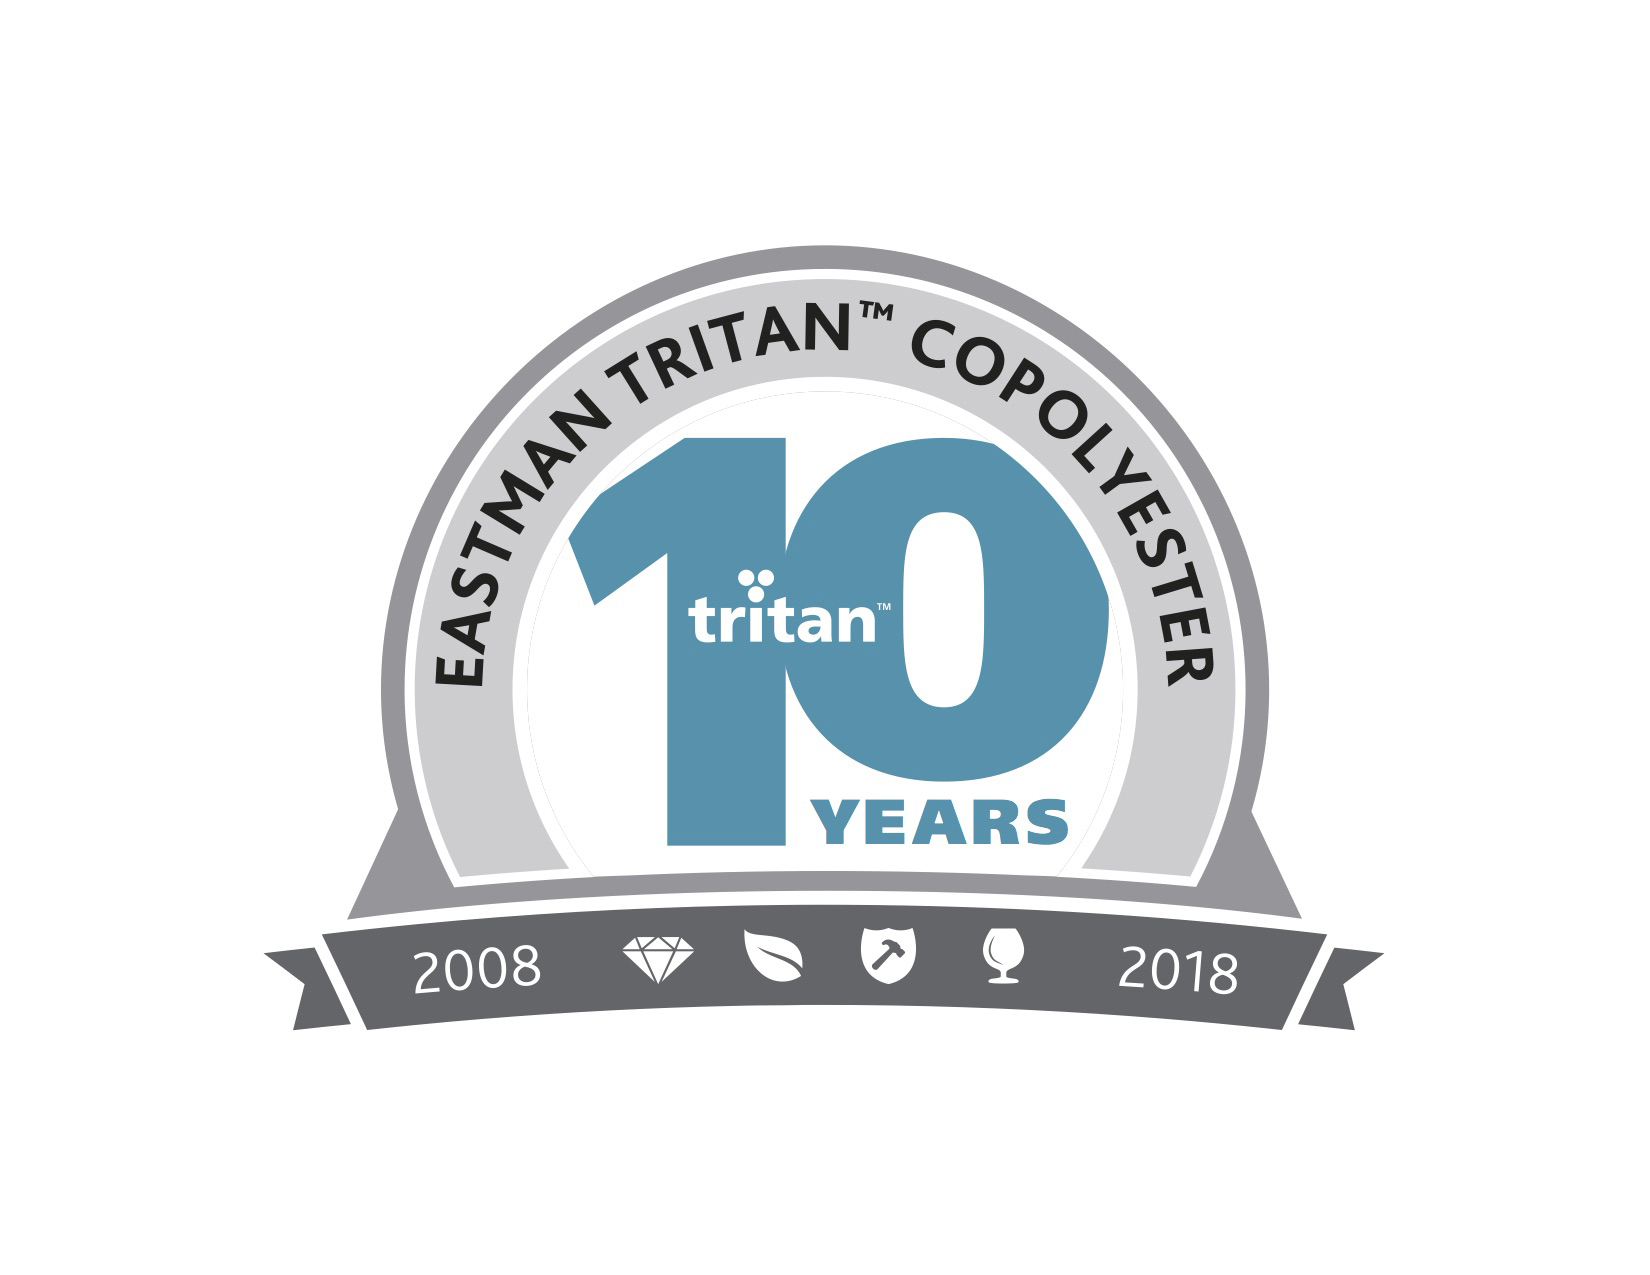 Global specialty plastics provider Eastman marks the milestone 10th anniversary of Tritan™ copolyester, a clear, tough, chemical-resistant polymer found in products made by Newell, Nalgene, CamelBak and NuGlass.